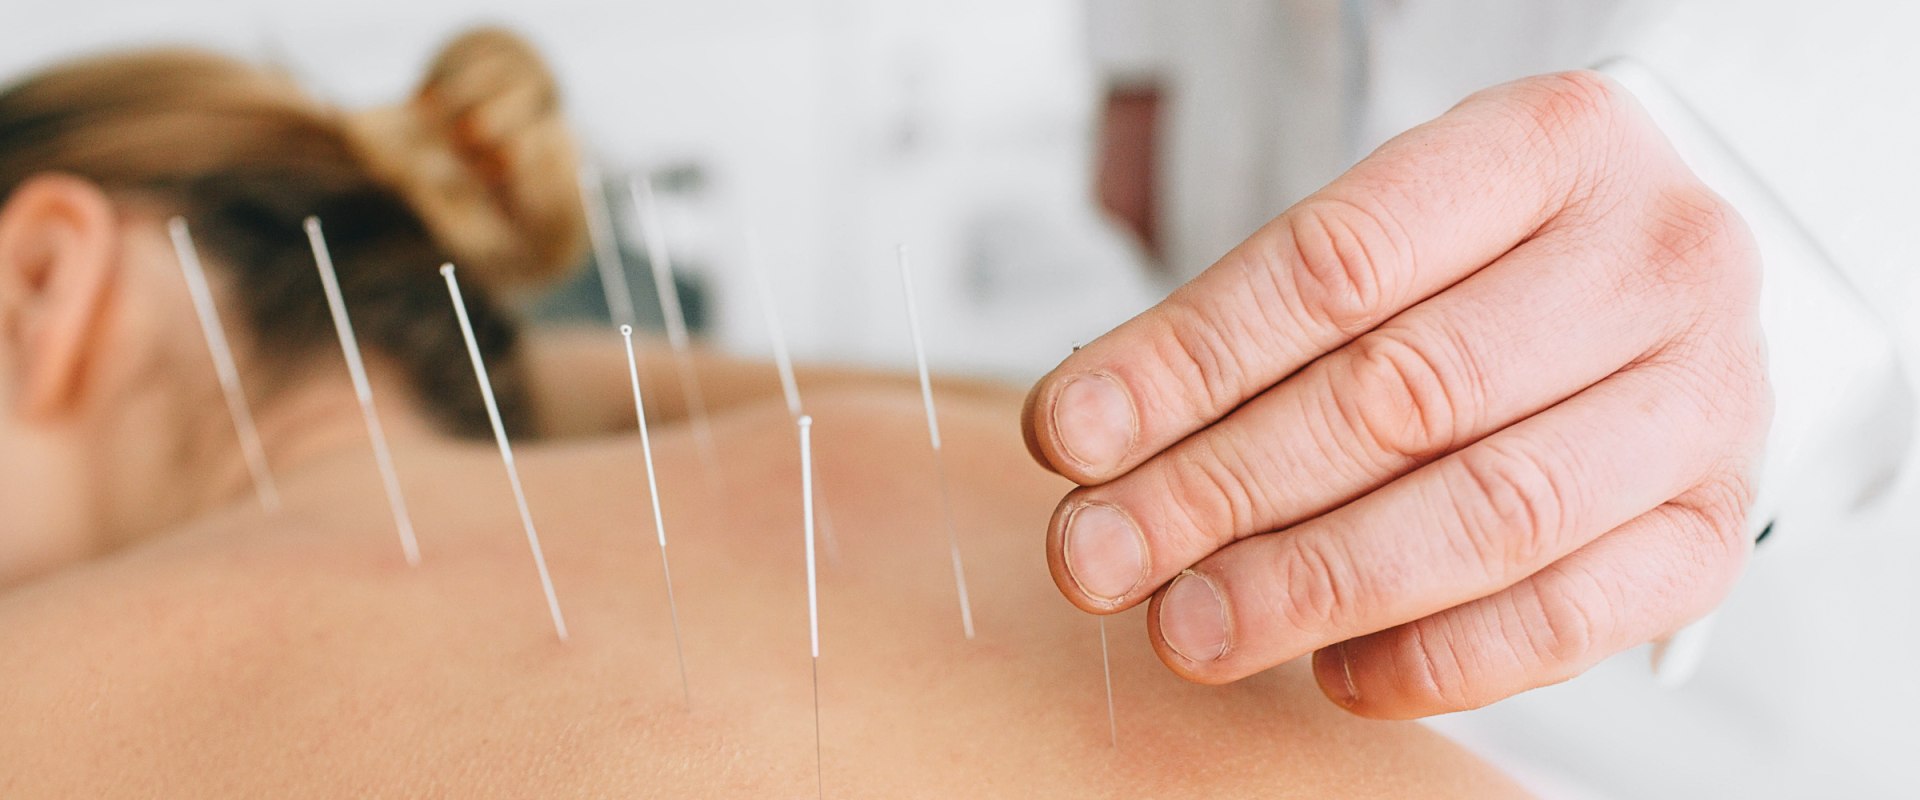 The Benefits of Massage Therapy for Fibromyalgia